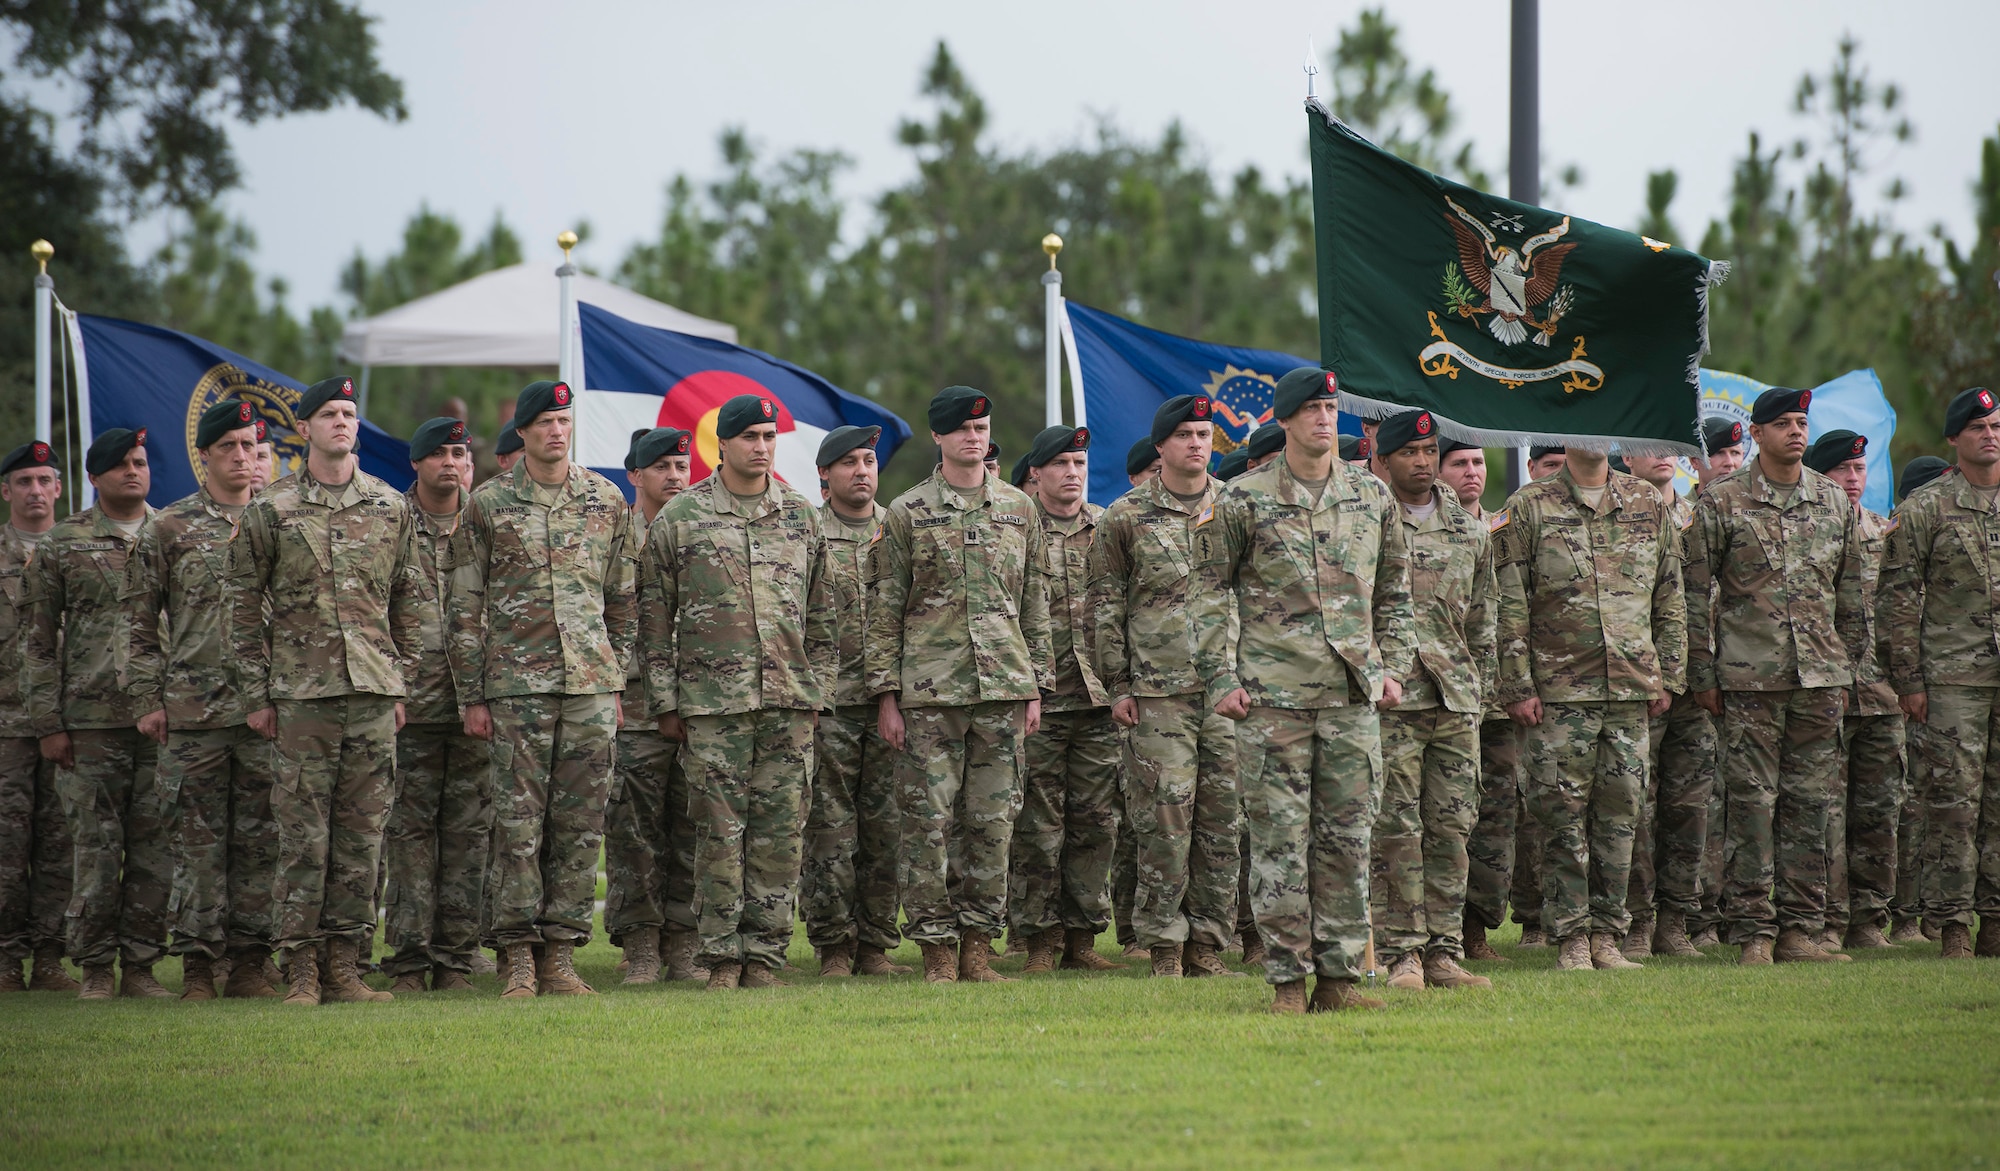 Green Berets from the 7th Special Forces Group (Airborne) stand at attention during a change of command ceremony June 15 at Eglin Air Force Base, Fla. During the ceremony Col. Michael Ball relinquished command of the 7th SFG(A) to Col. Patrick Colloton. Colloton previously served as the 7th SFG(A) 1 st Battalion commander. (U.S. Air Force photo/Ilka Cole) 